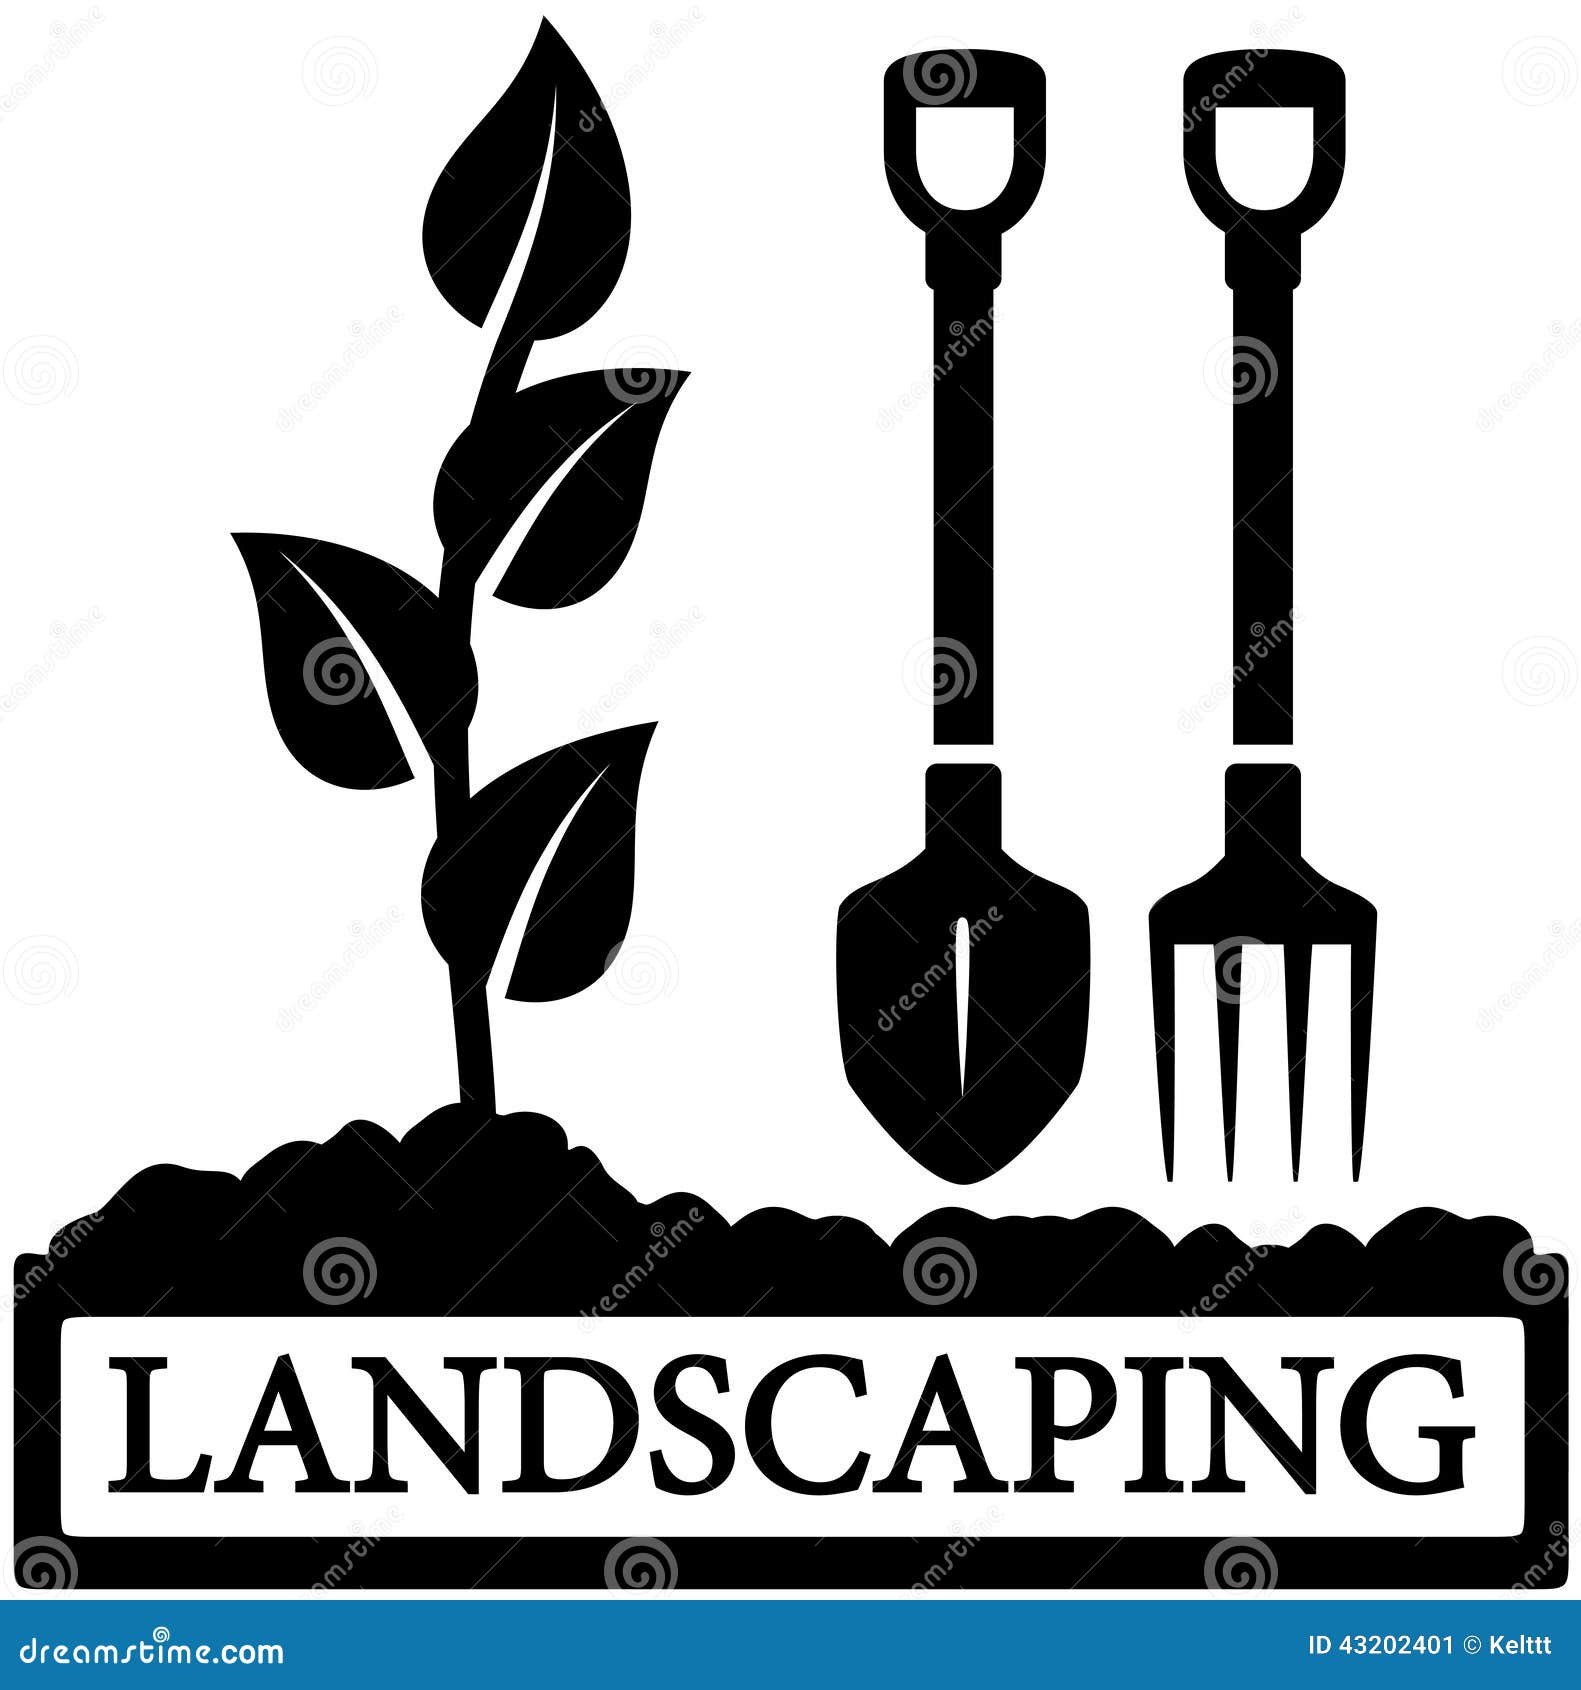 Landscaping Icon With Sprout And Gardening Tools Stock Vector - Image ...